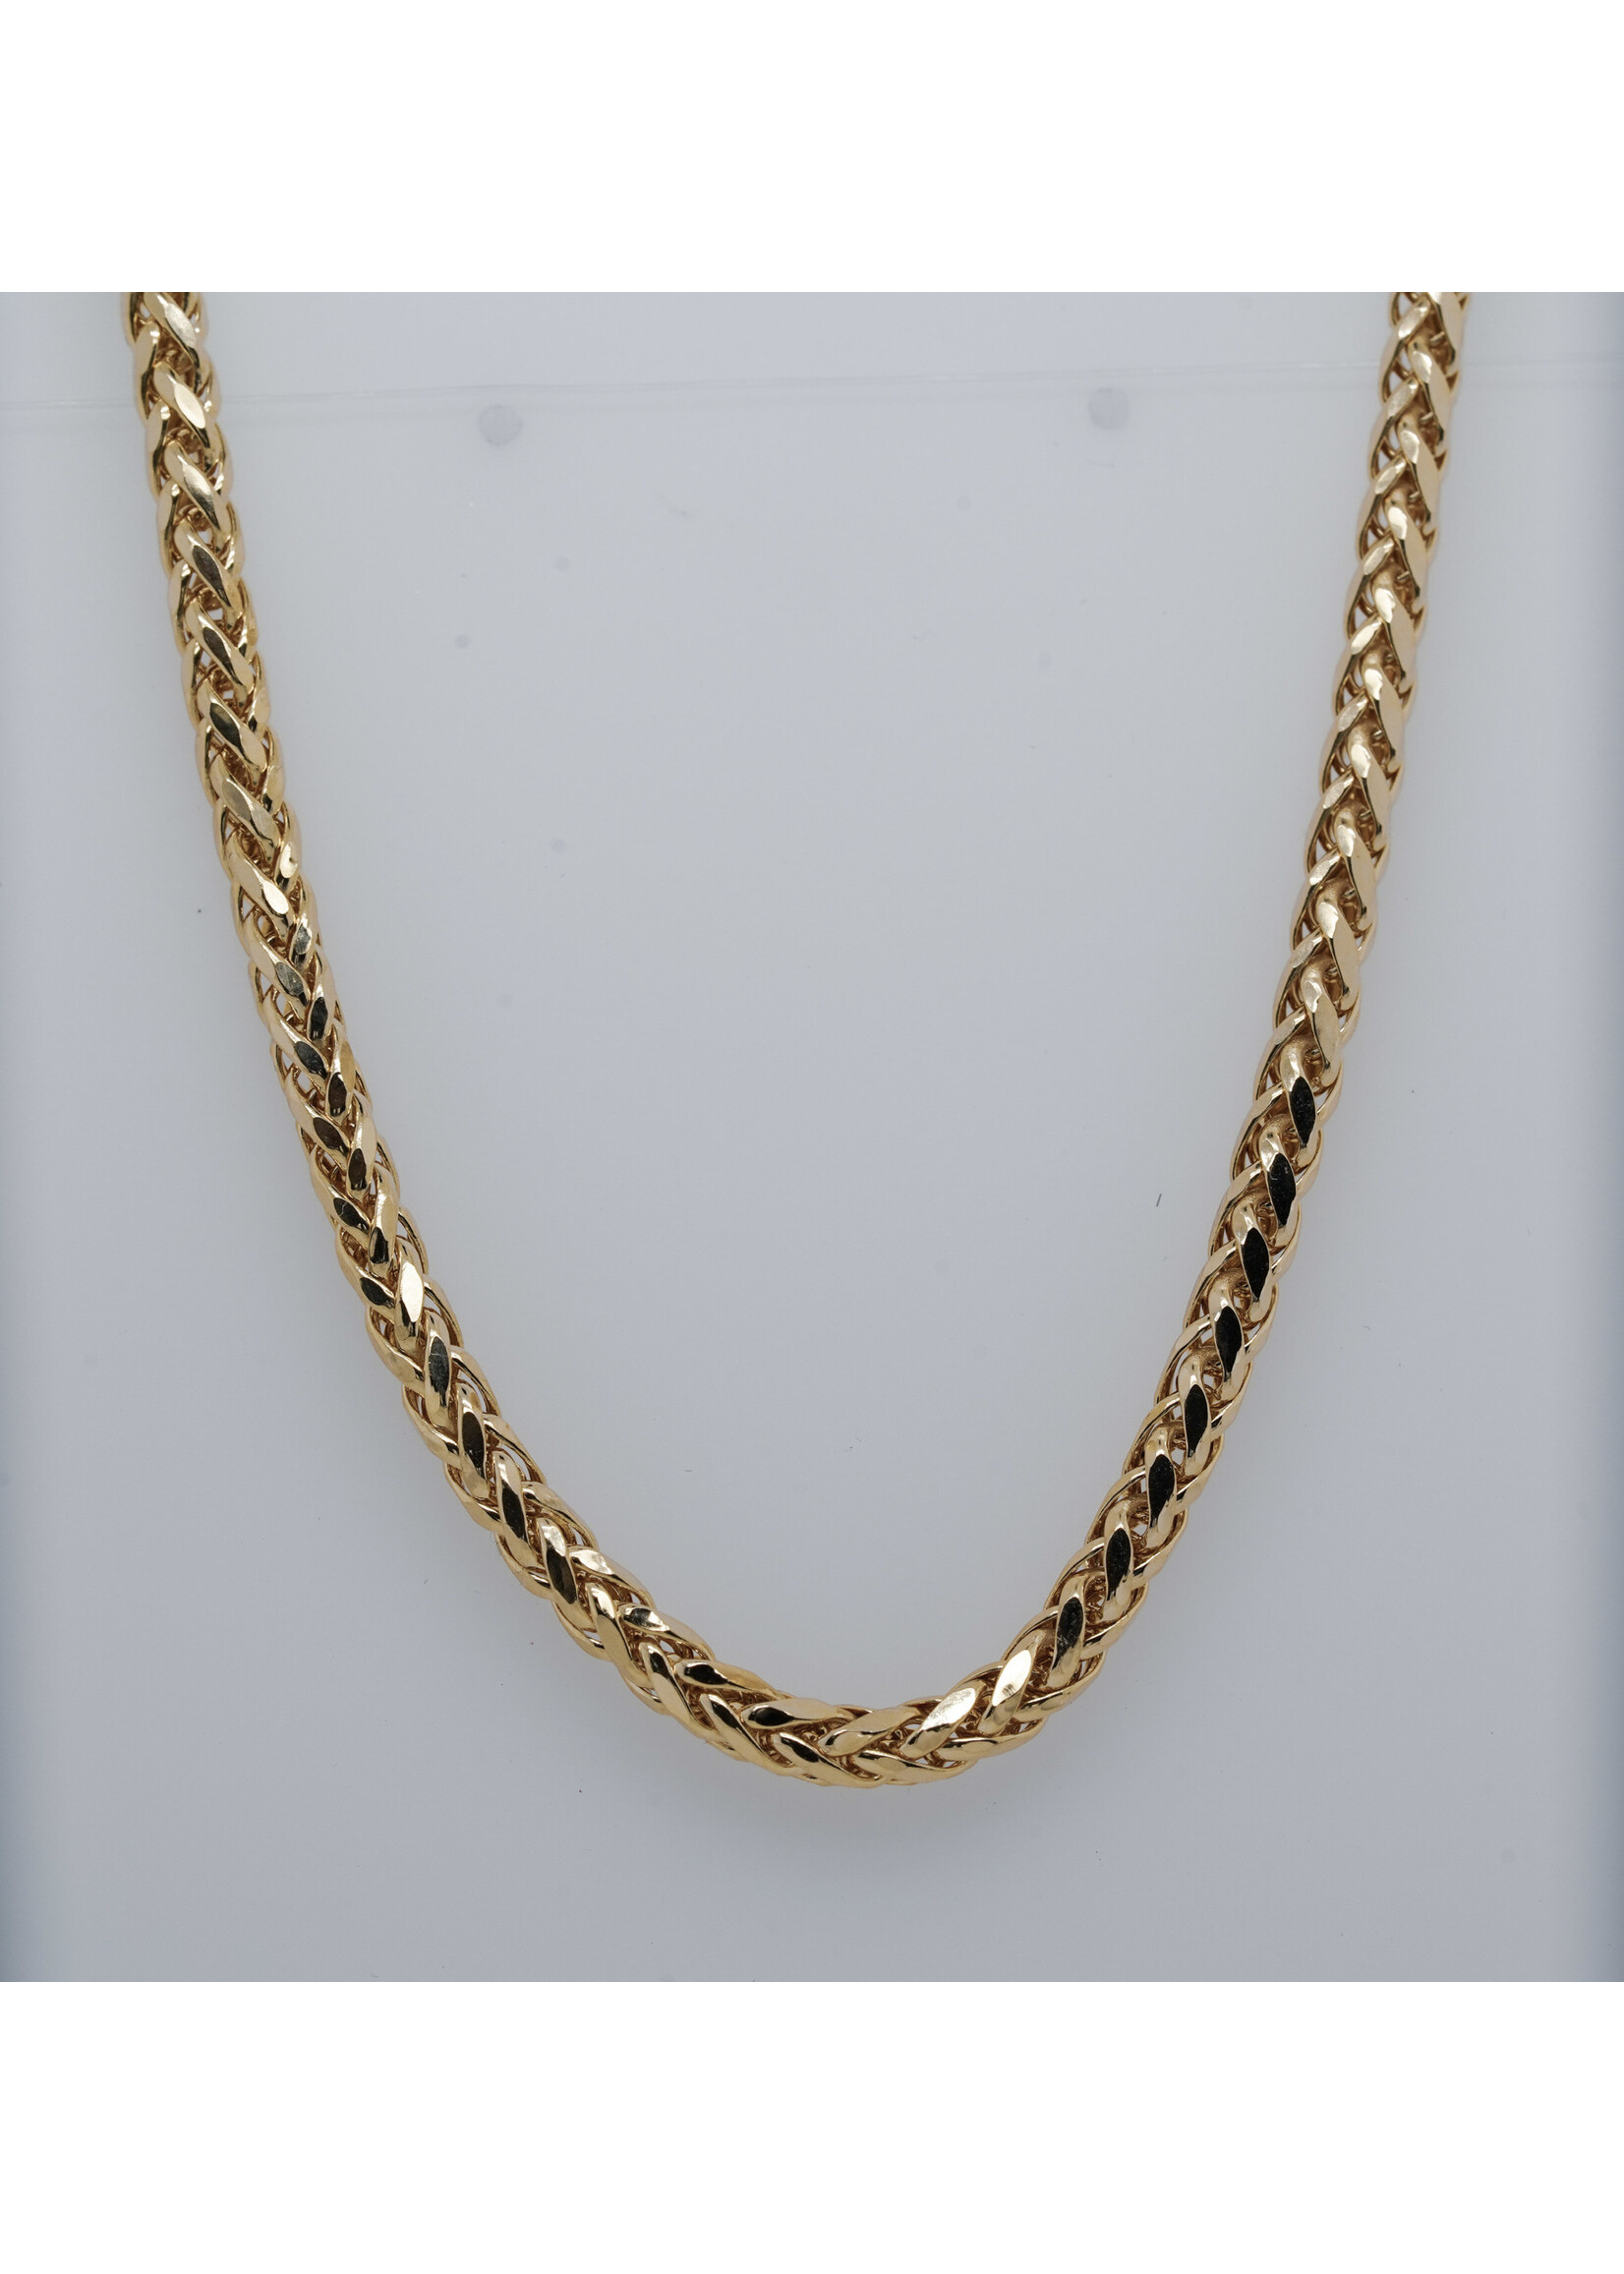 24" 10KY 10.2g 3.5mm Palm Chain